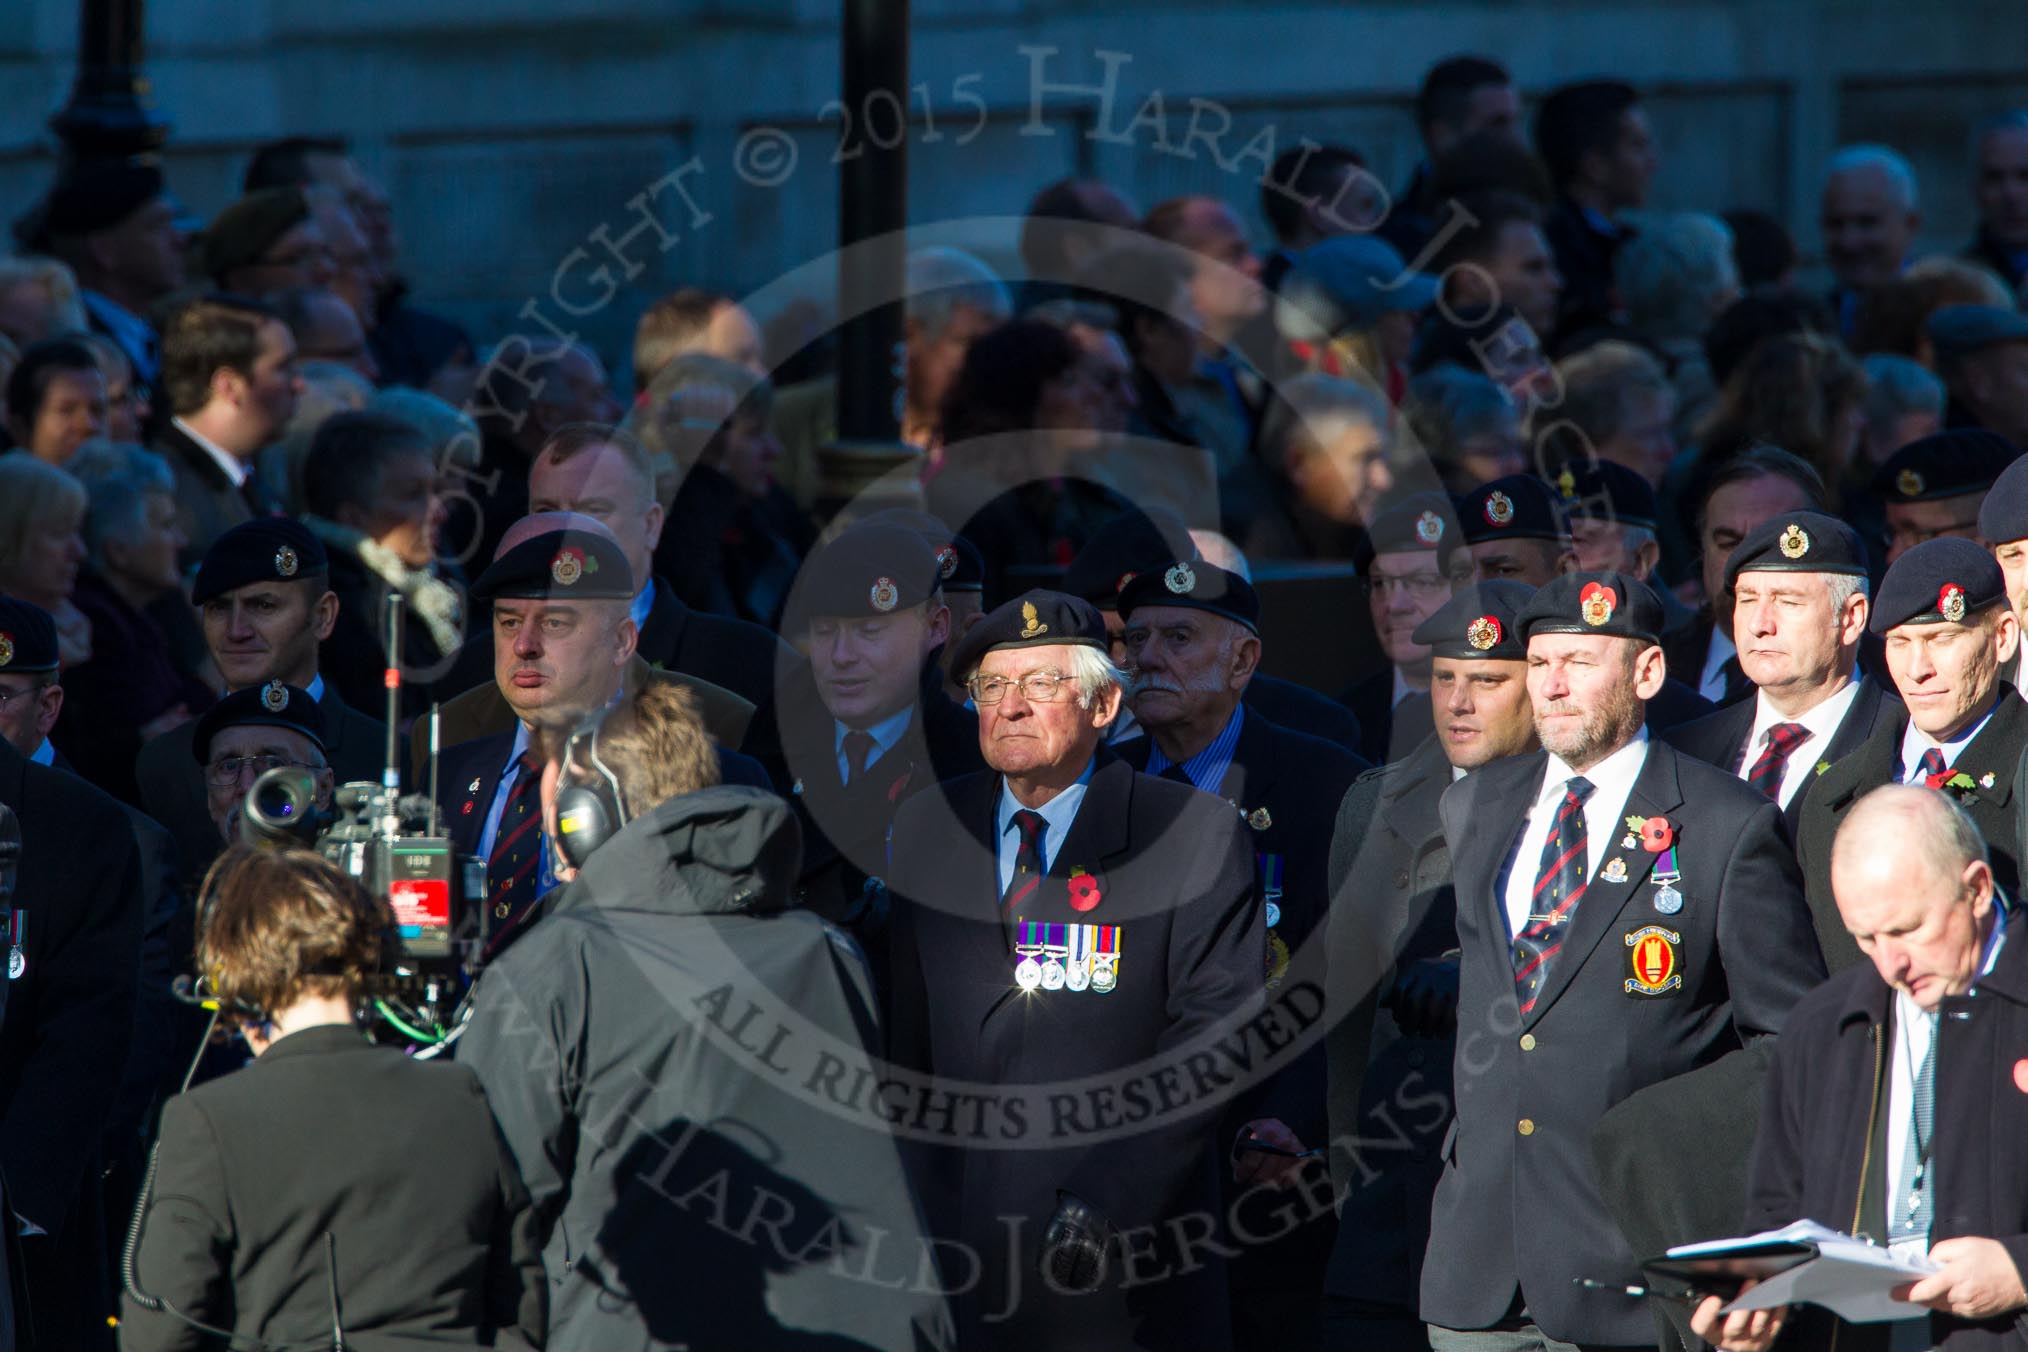 Remembrance Sunday Cenotaph March Past 2013: B22 - Airborne Engineers Association..
Press stand opposite the Foreign Office building, Whitehall, London SW1,
London,
Greater London,
United Kingdom,
on 10 November 2013 at 12:02, image #1469